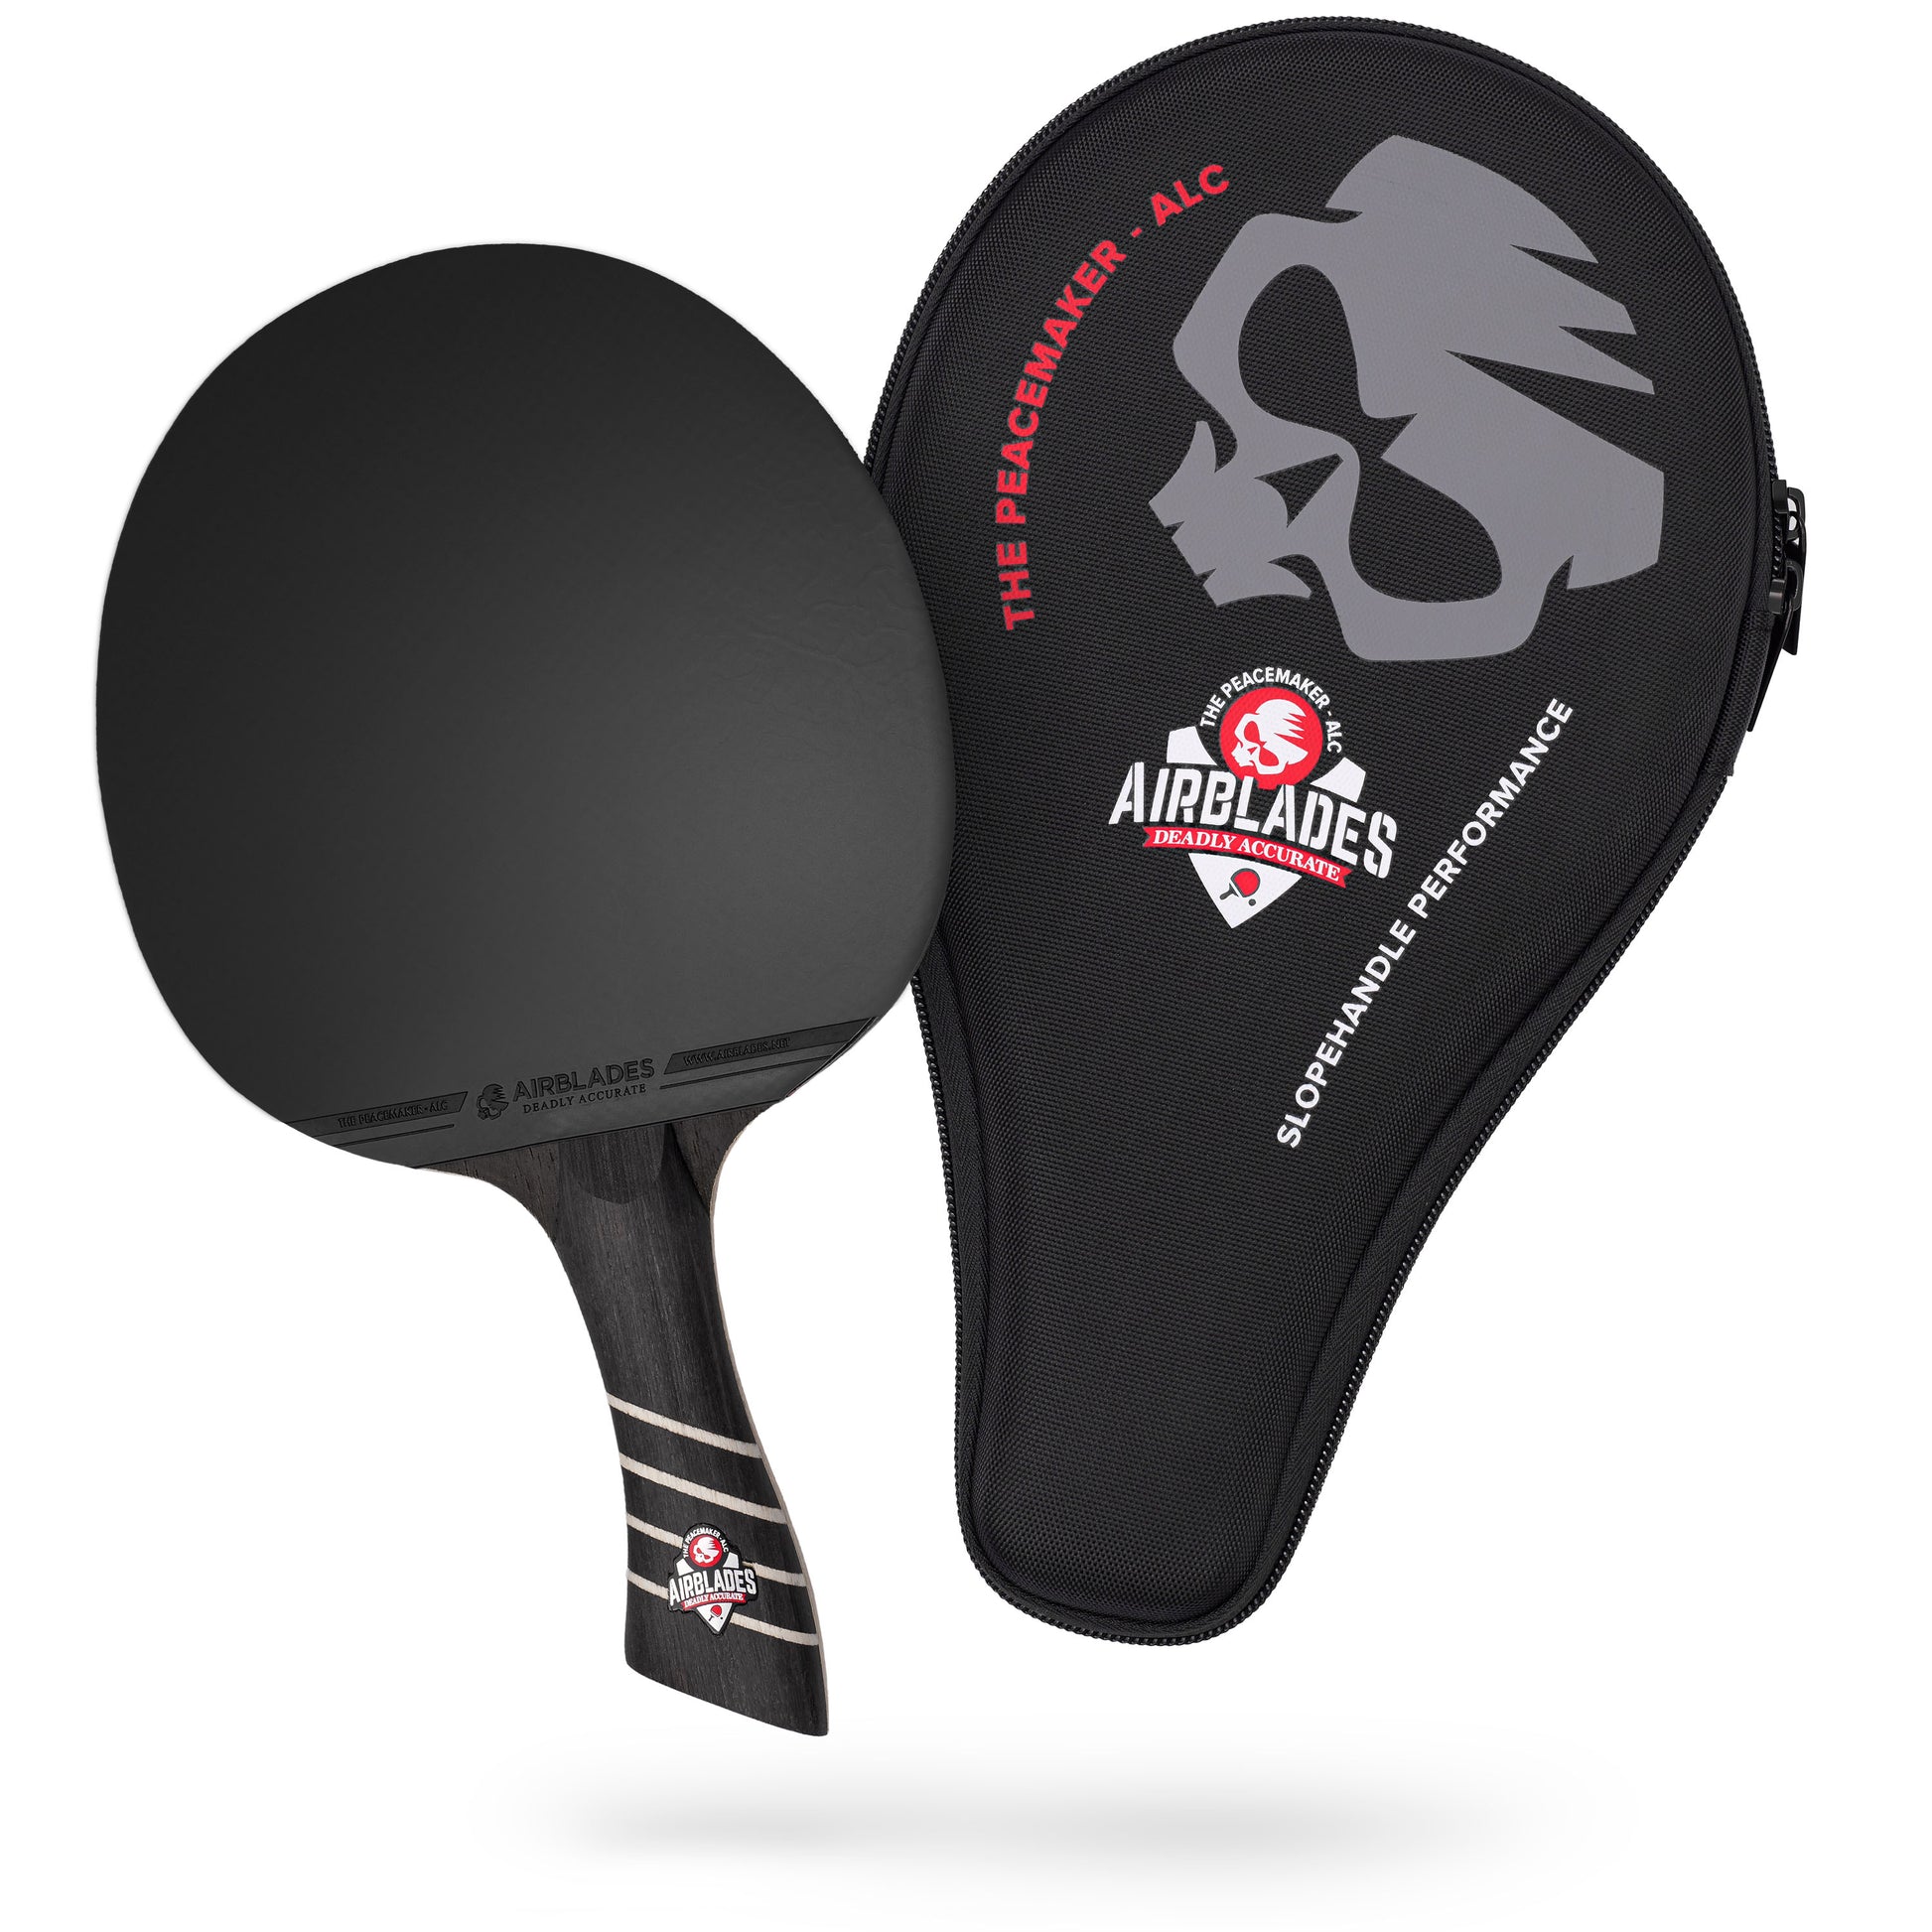  STIGA Pro Carbon Performance-Level Table Tennis Racket with  Carbon Technology for Tournament Play - Red and Blue Colors : STIGA: Sports  & Outdoors